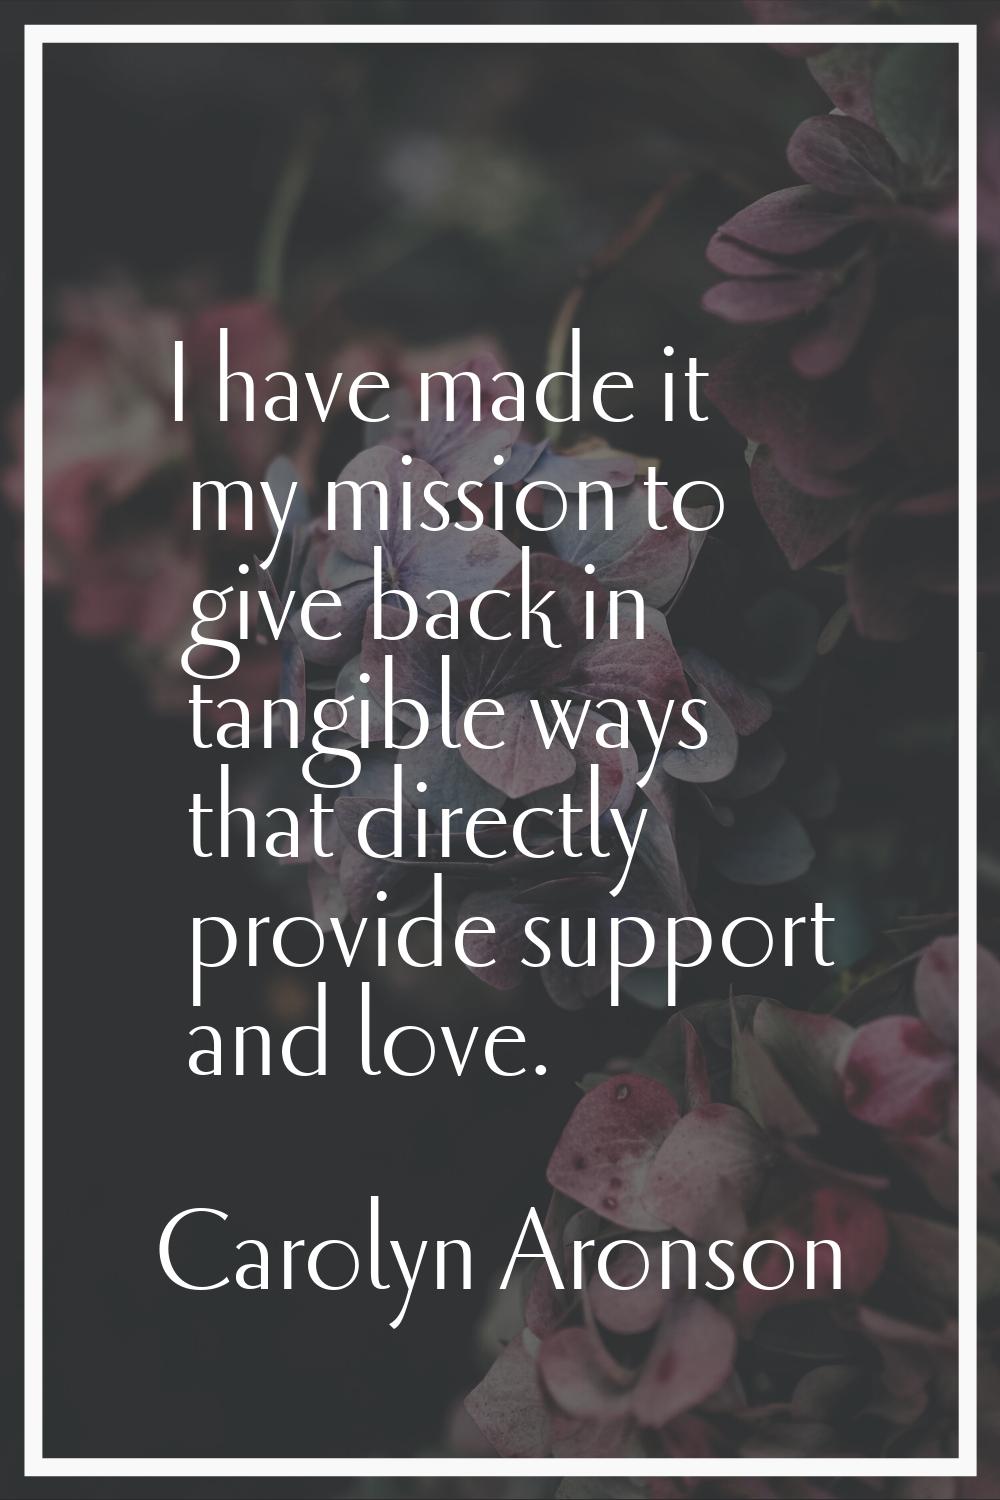 I have made it my mission to give back in tangible ways that directly provide support and love.